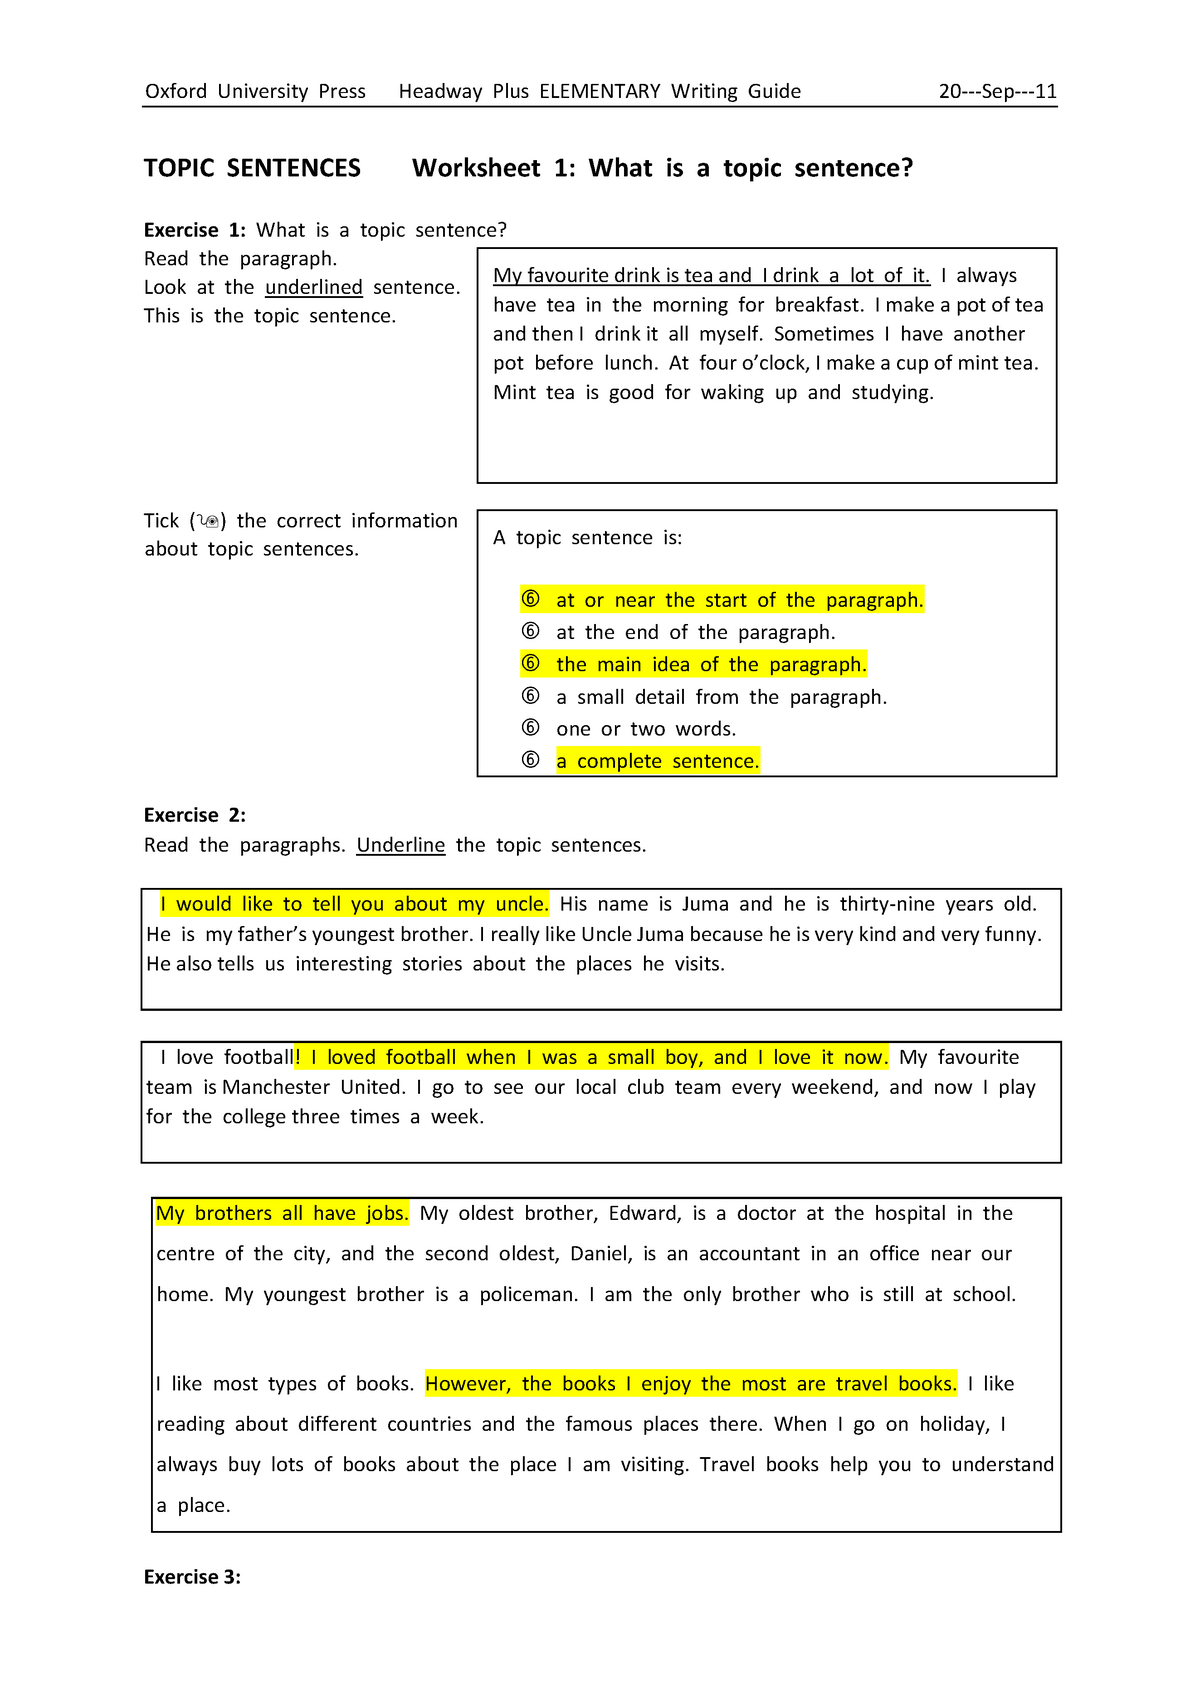 Topic Sentences Worksheet 1 TOPIC SENTENCES Worksheet 1 What Is A Topic Sentence Exercise